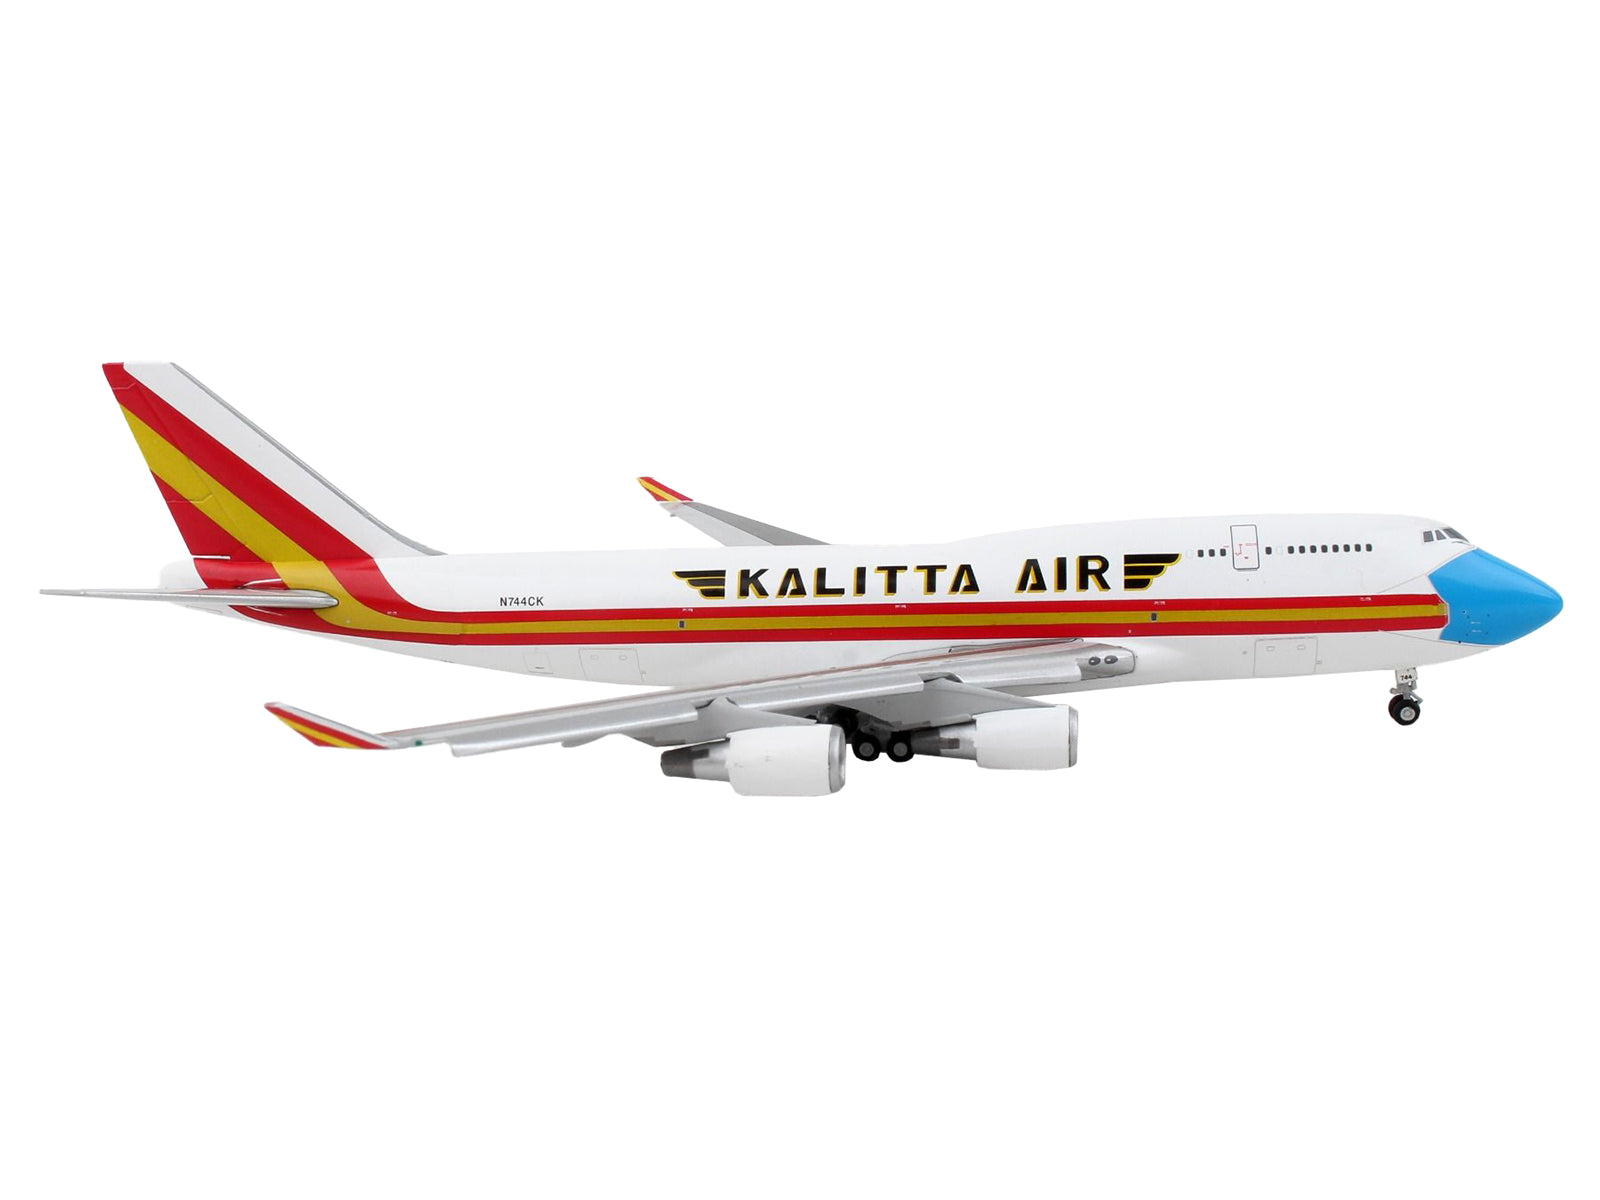 Boeing 747-400F Commercial Aircraft with Flaps Down "Kalitta Air" White with Stripes "Mask" Livery 1/400 Diecast Model Airplane by GeminiJets